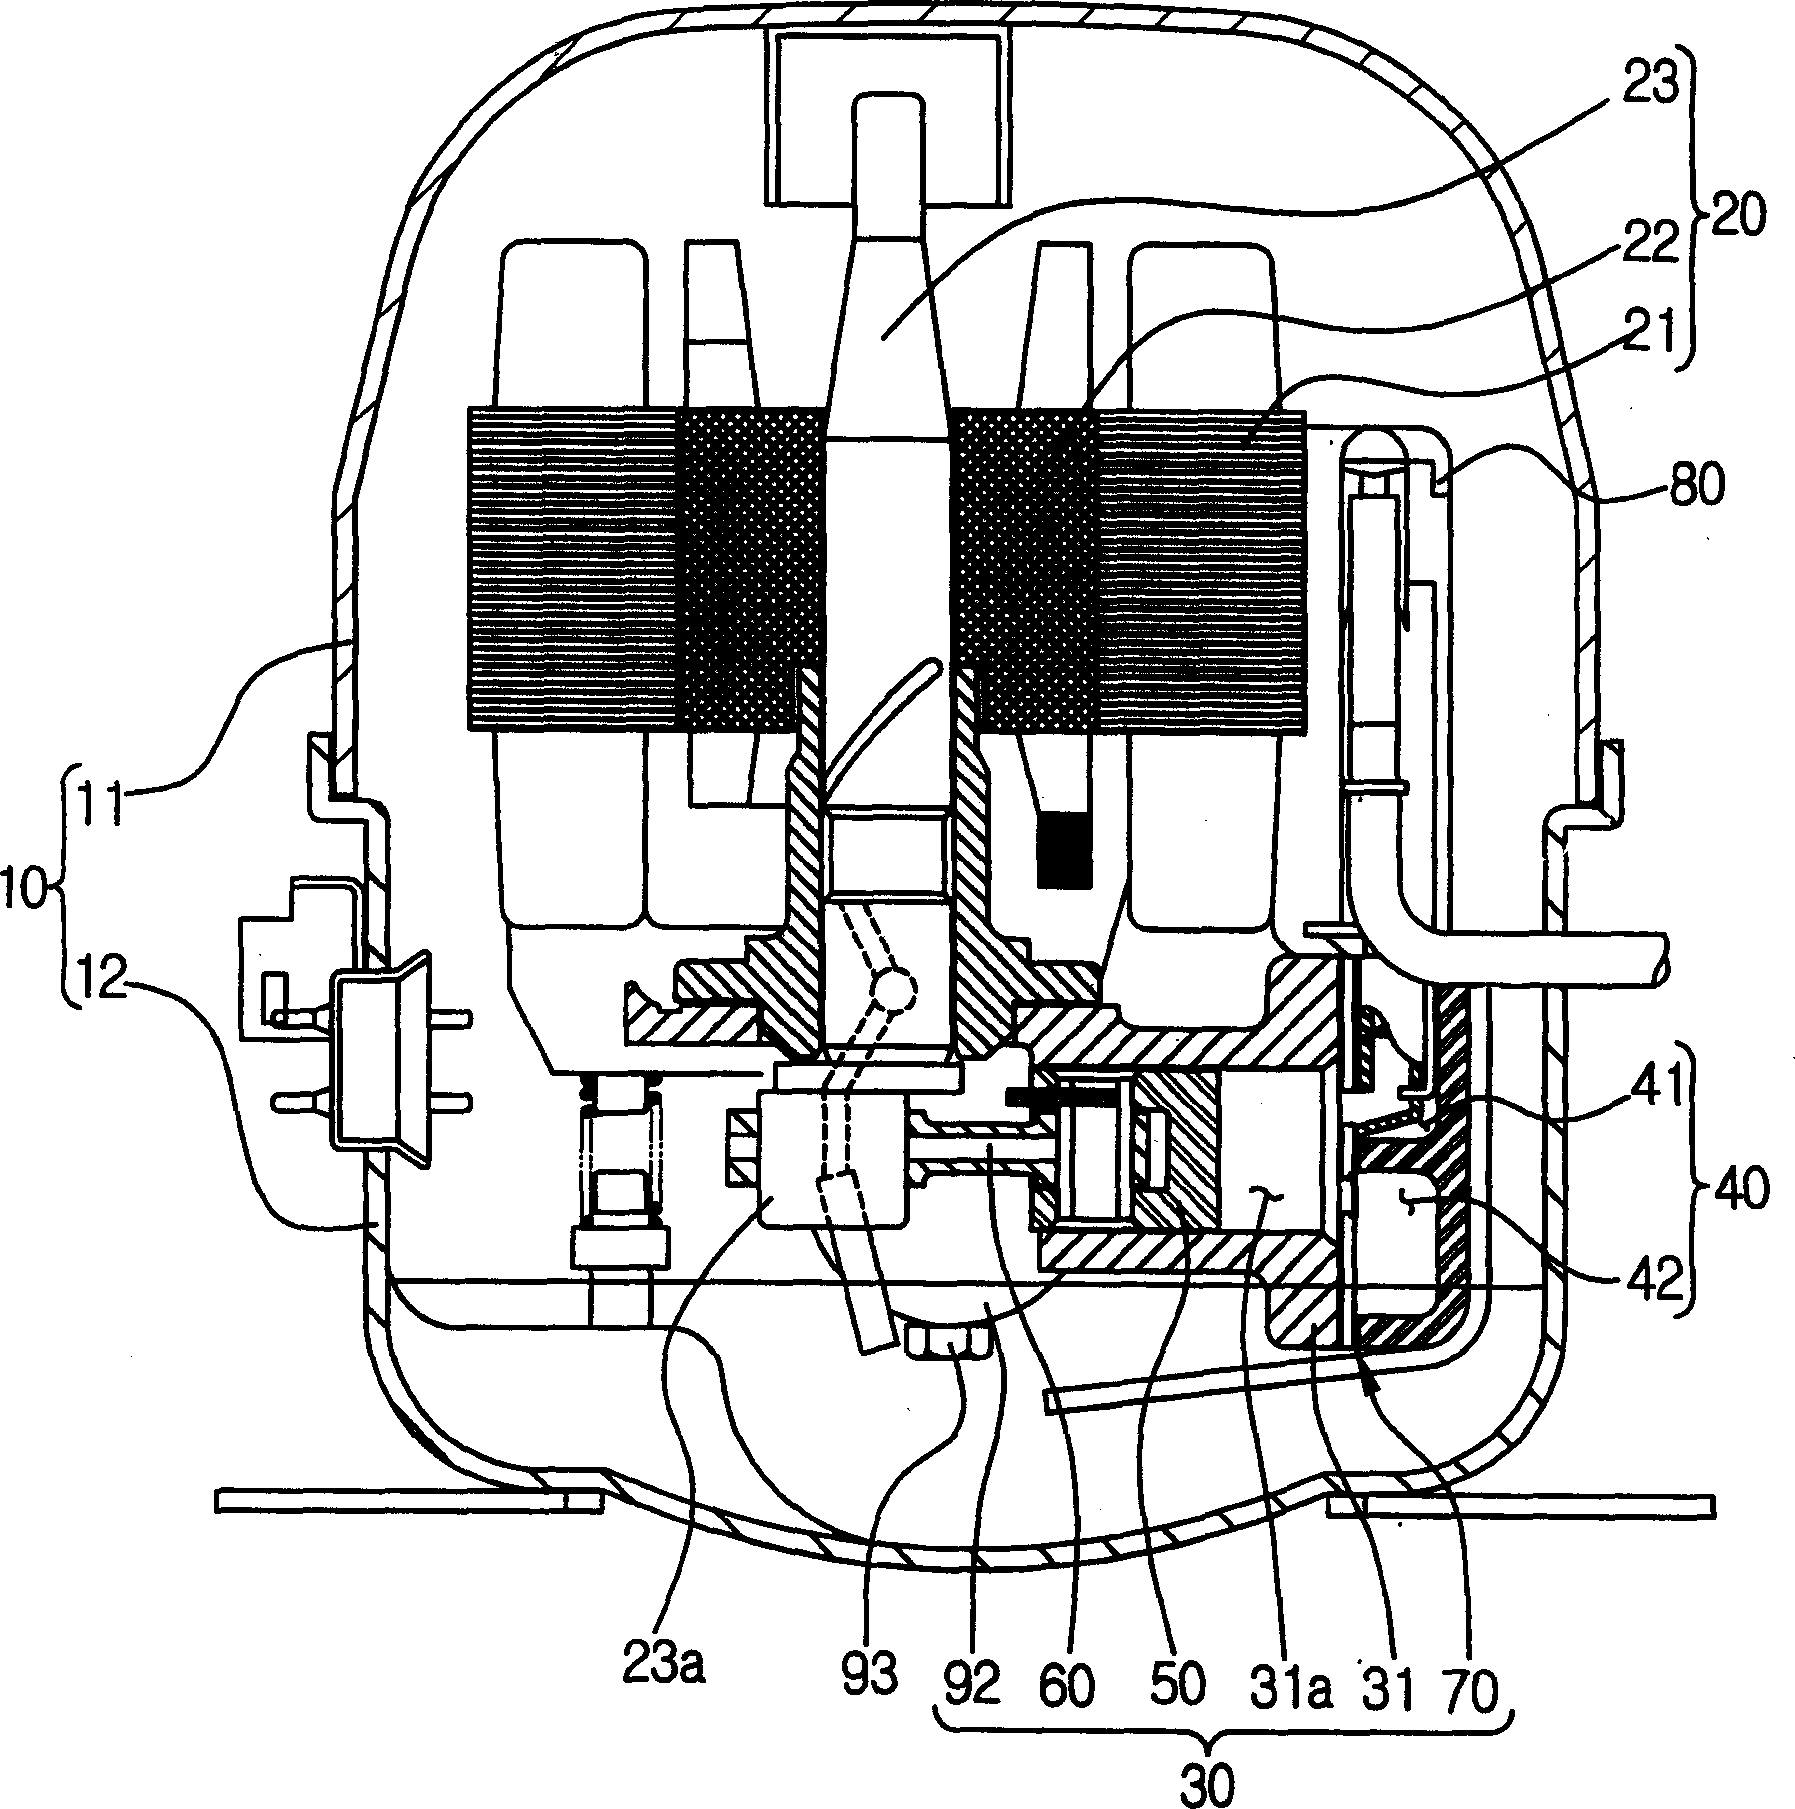 Joint structure for refrigerant discharge tubes used in hermetic compressors